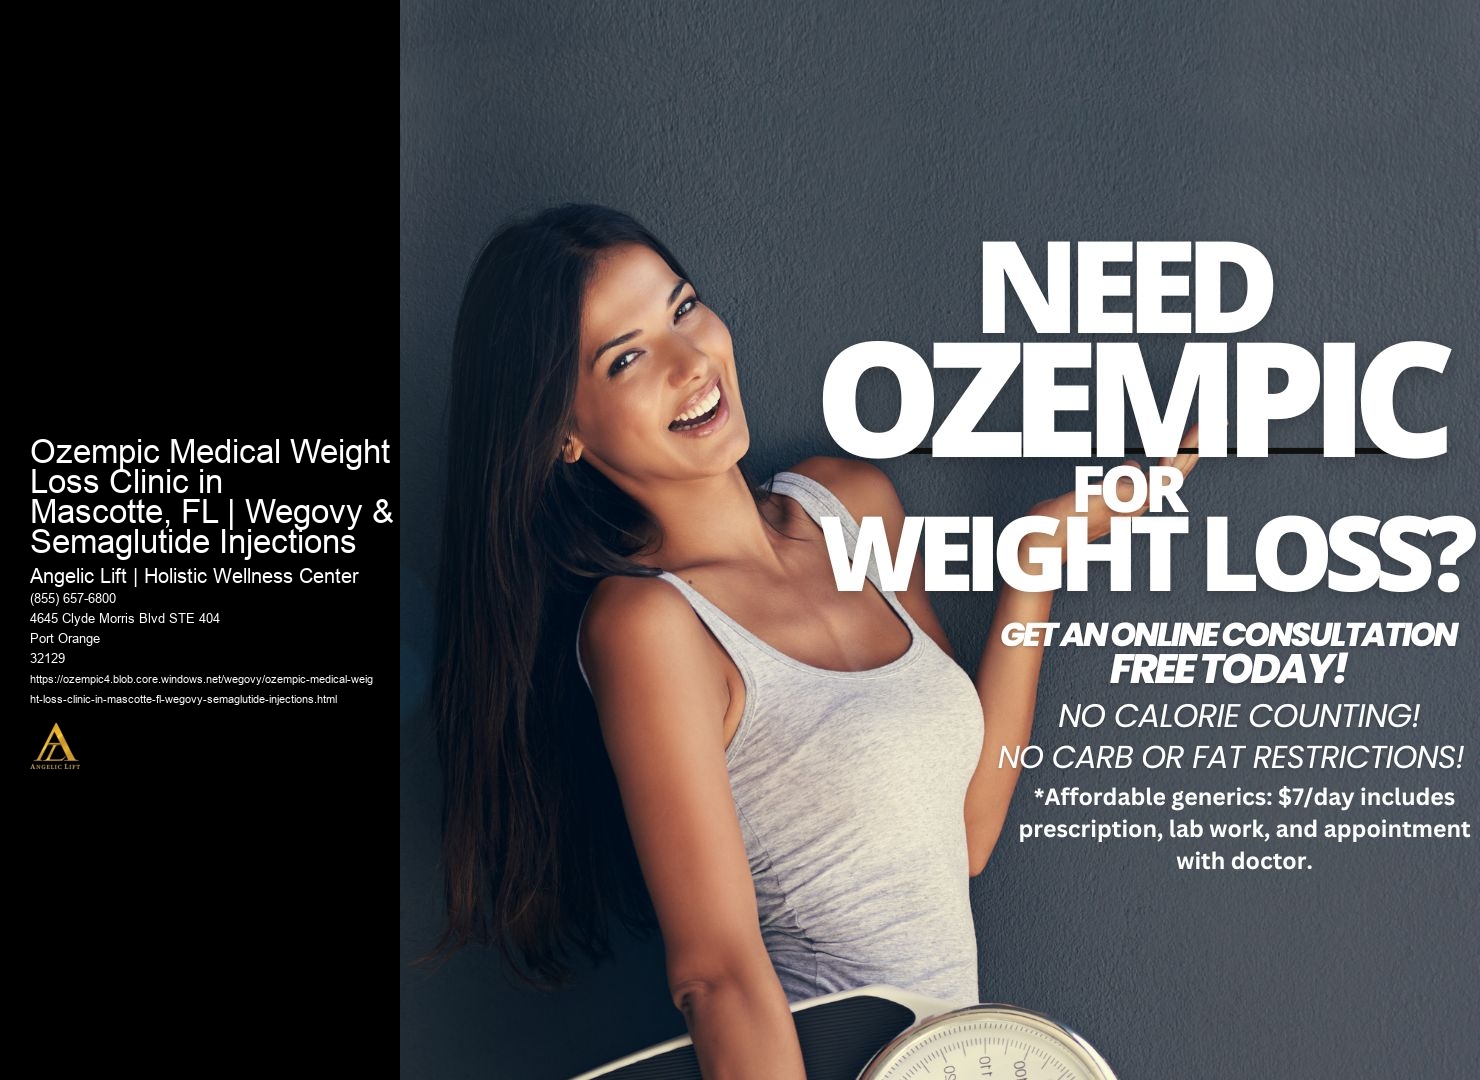 Ozempic Medical Weight Loss Clinic in Mascotte, FL | Wegovy & Semaglutide Injections